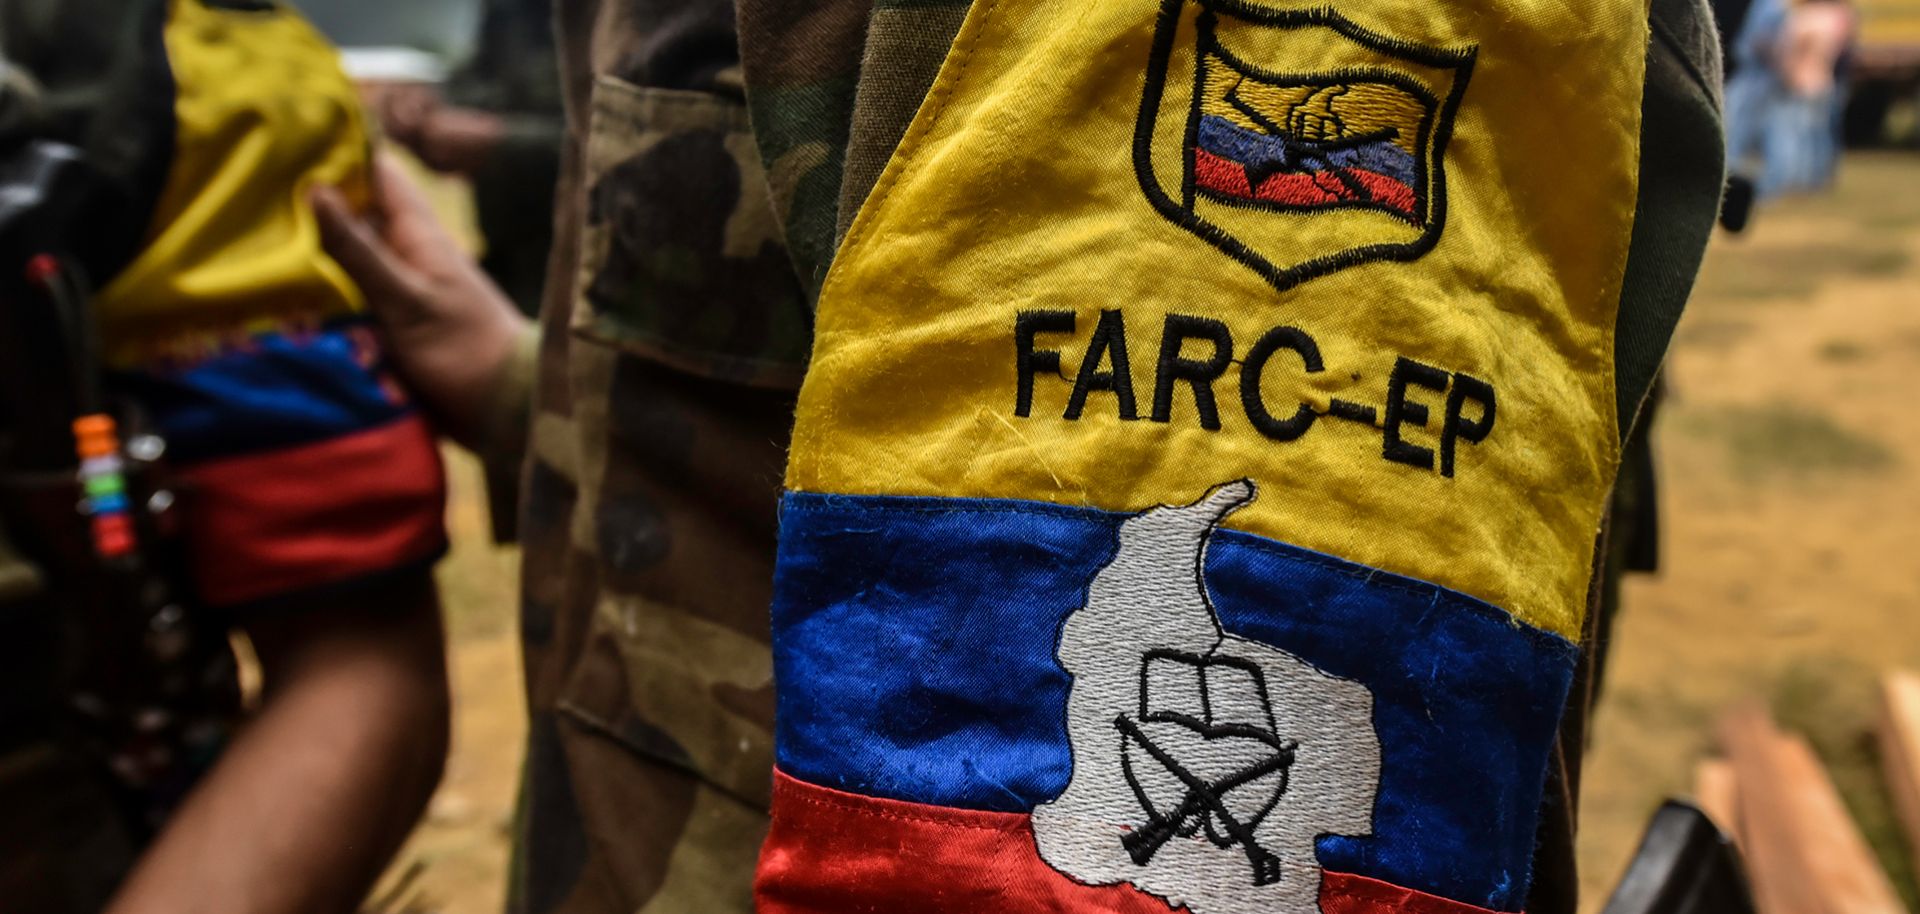 Without public support for the peace deal struck between the FARC and the Colombian government, a definitive resolution to their decadeslong conflict may remain elusive.